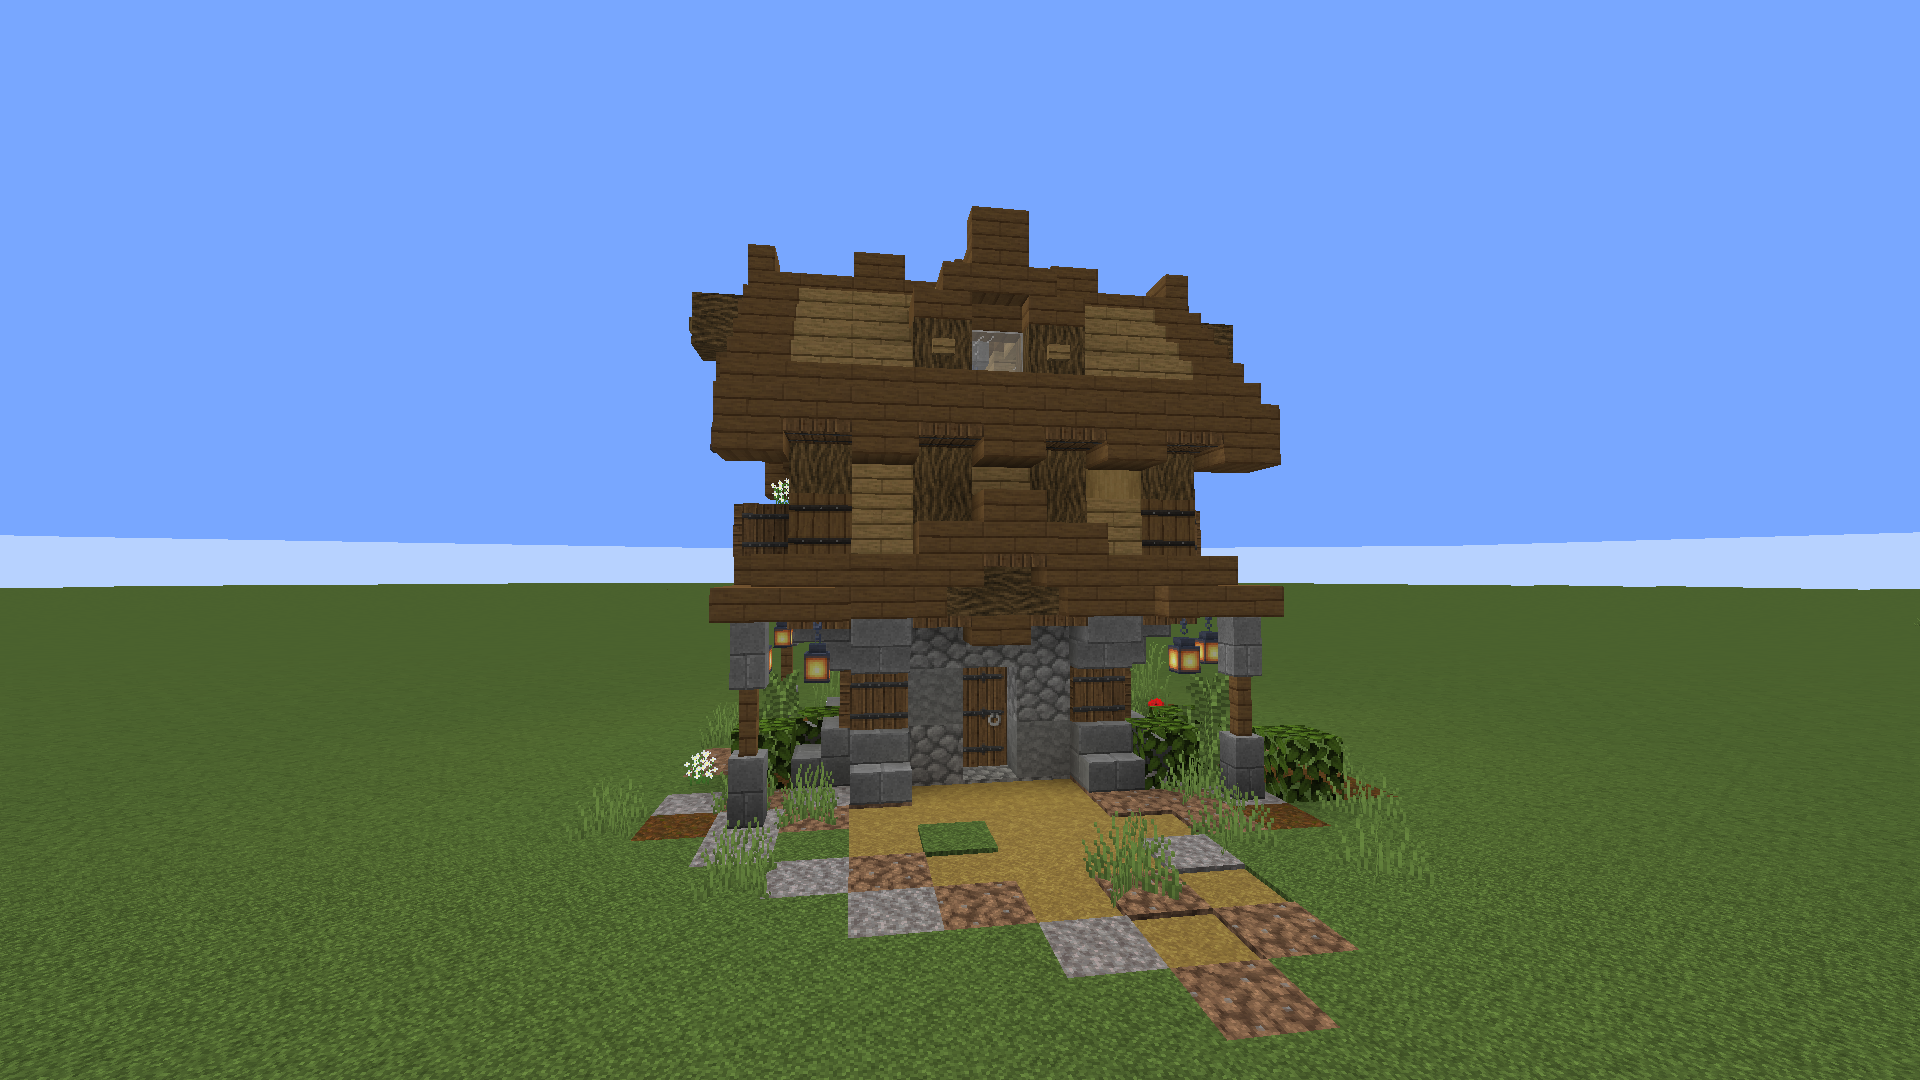 Minecract Small Oak and Stone house with interior schematic (litematic)